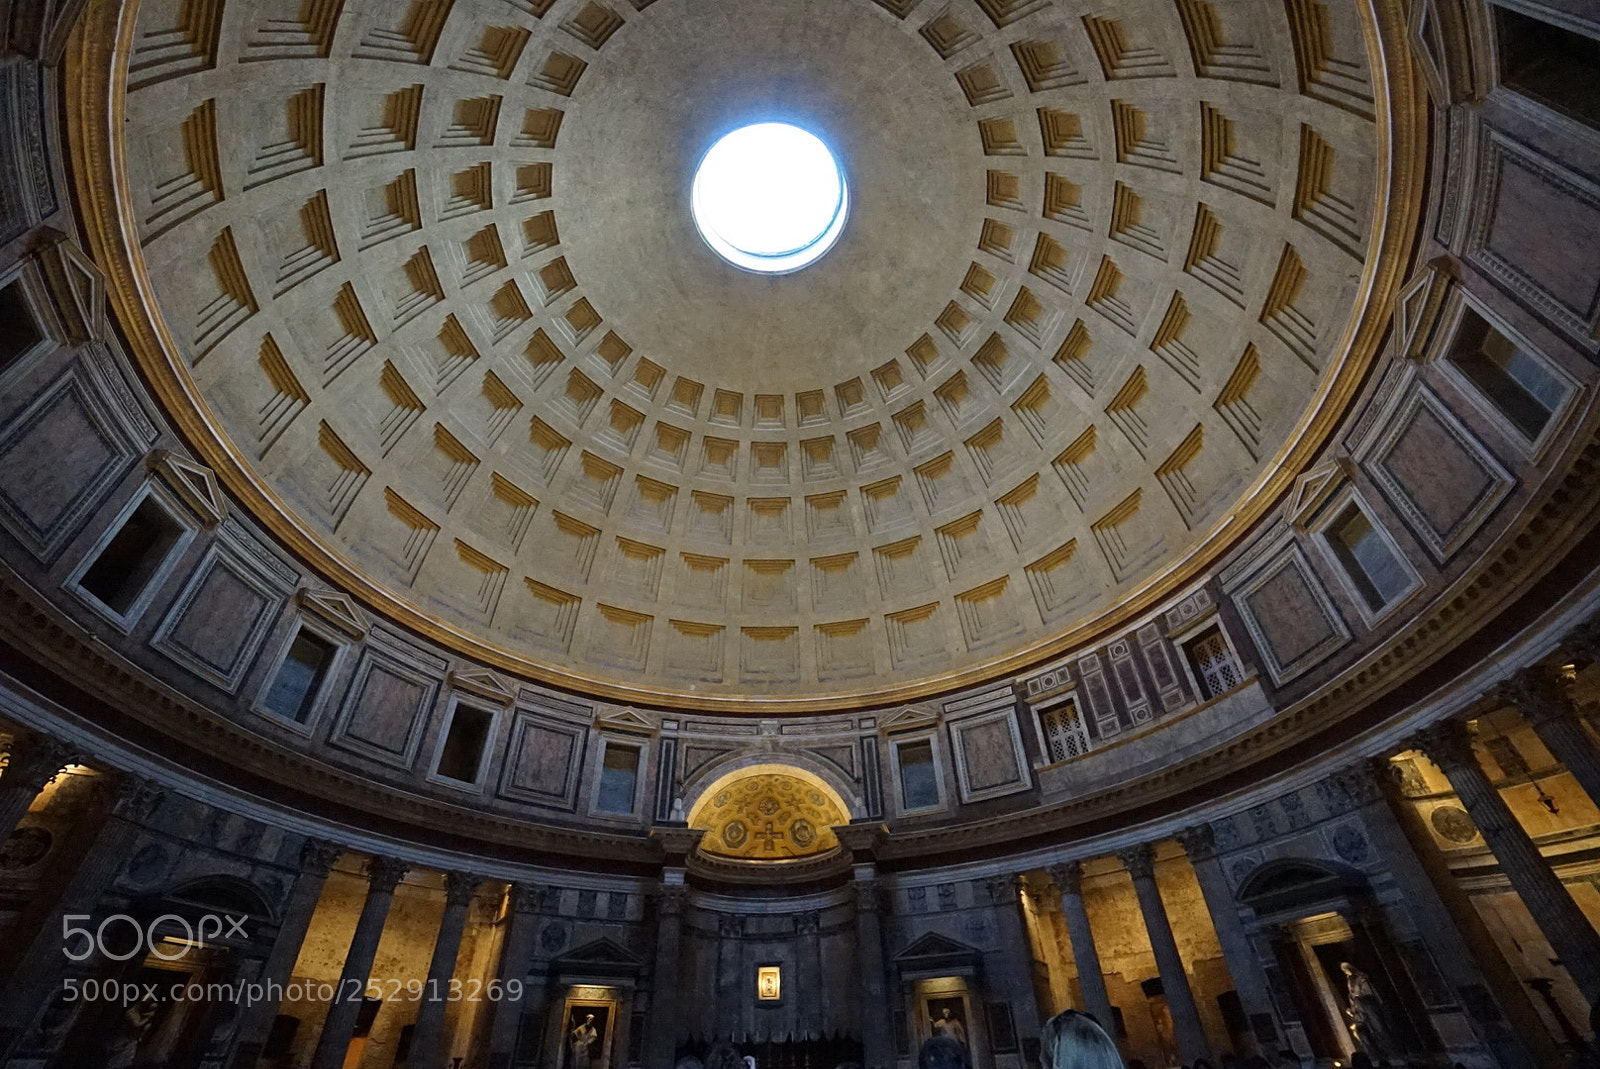 Sony a7 sample photo. Pantheon inner dome photography